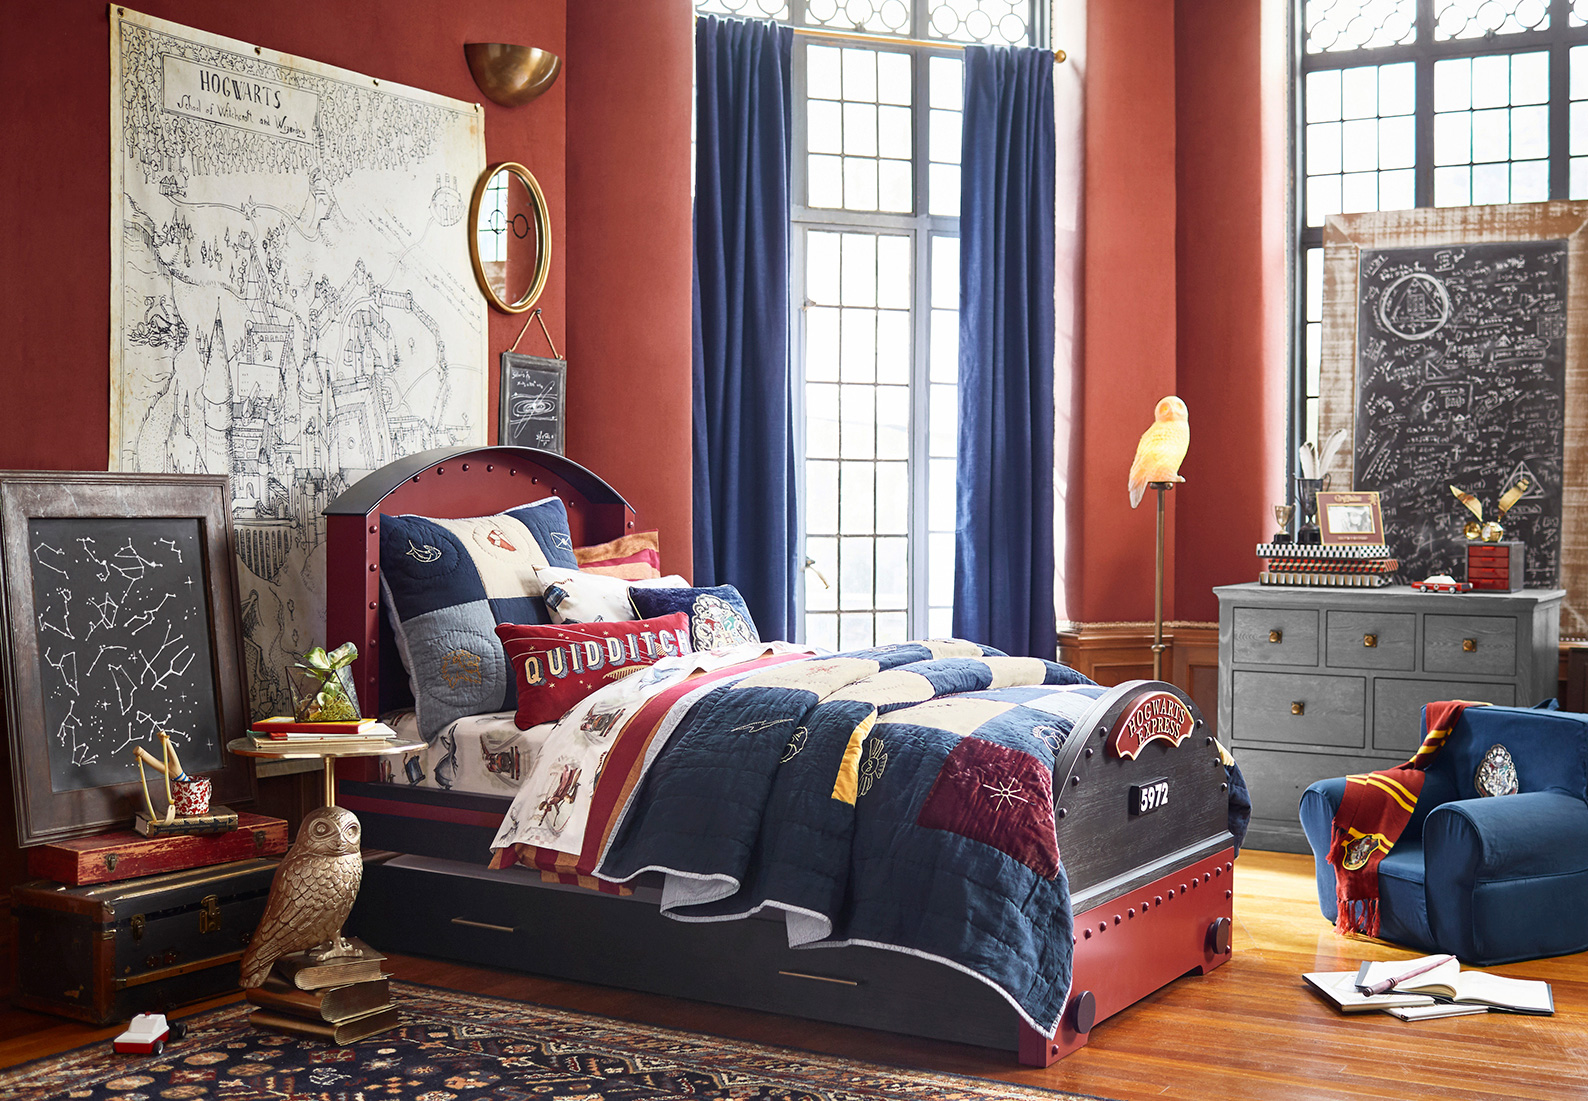 Harry Potter bedroom dreams with Pottery Barn Kids The